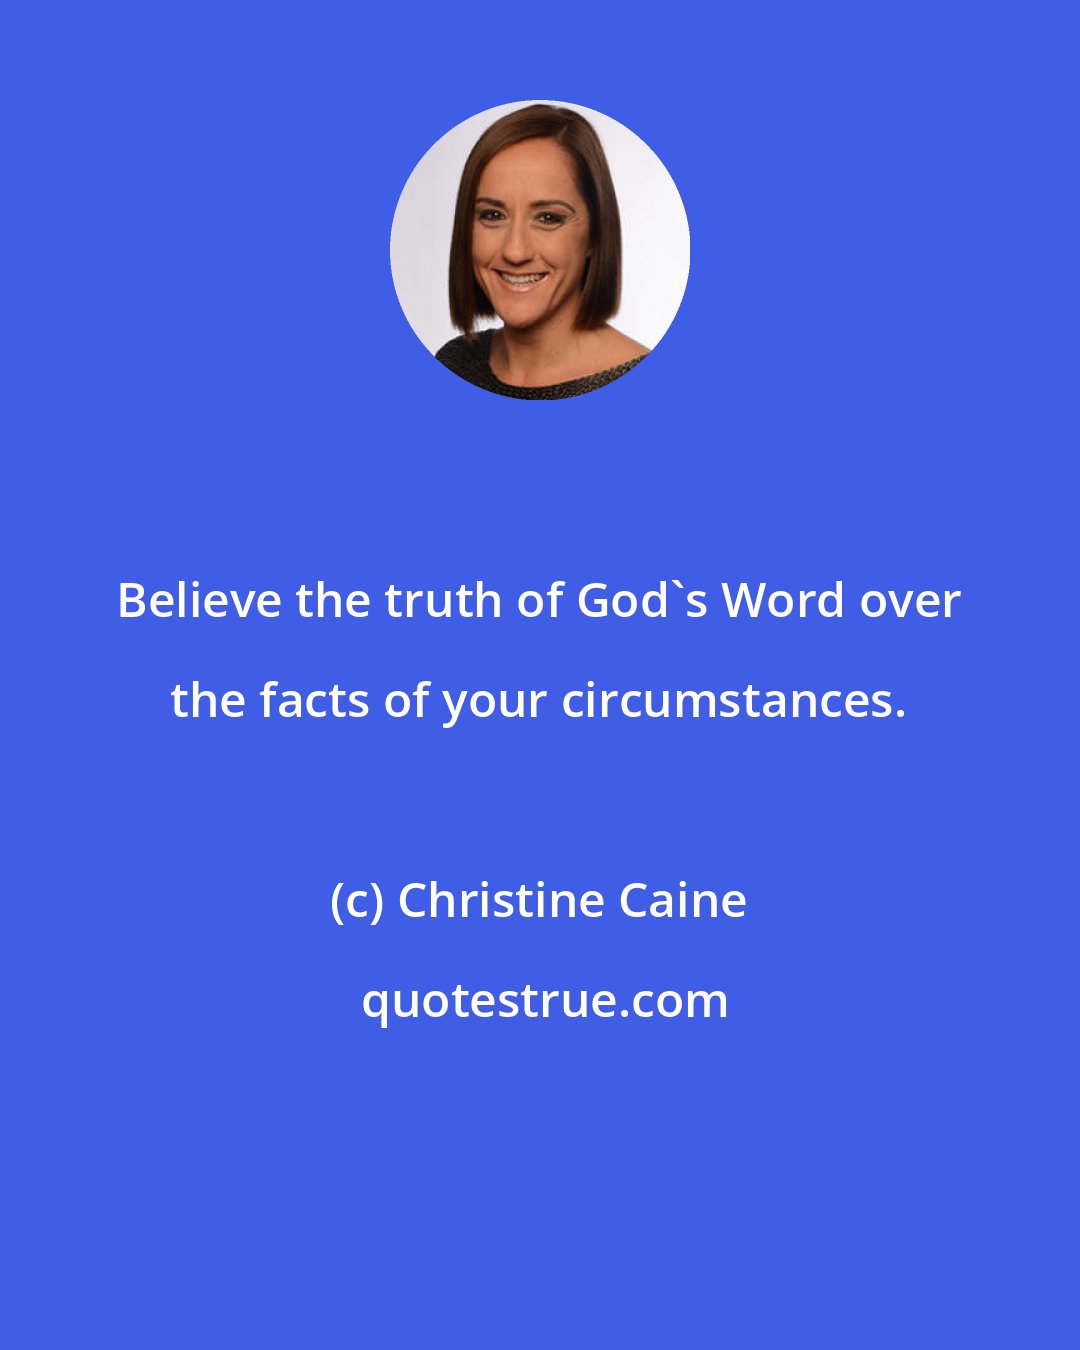 Christine Caine: Believe the truth of God's Word over the facts of your circumstances.